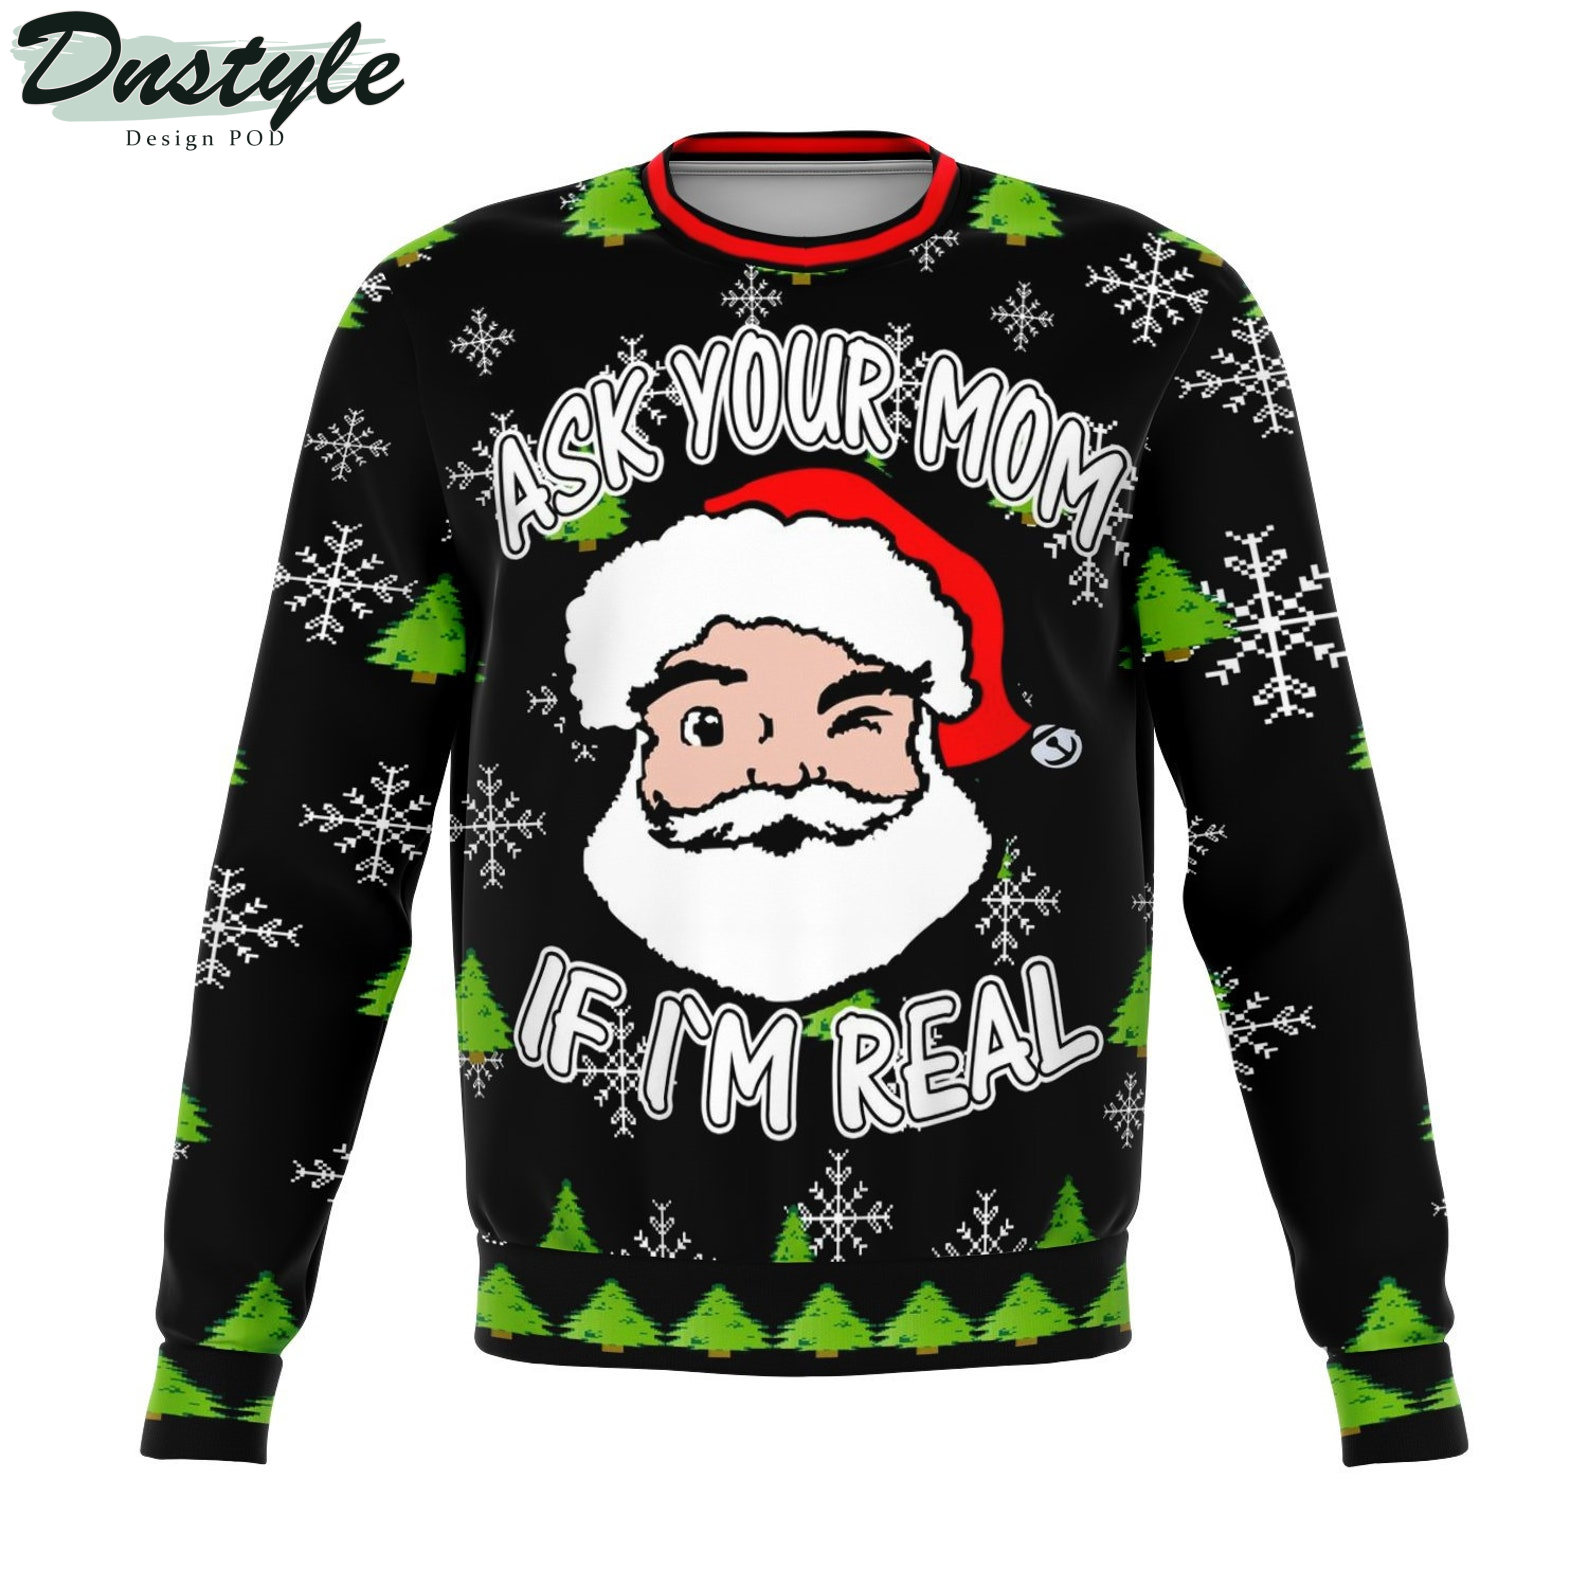 Ask your Mom If I'm Real 2022 Ugly Christmas Sweater